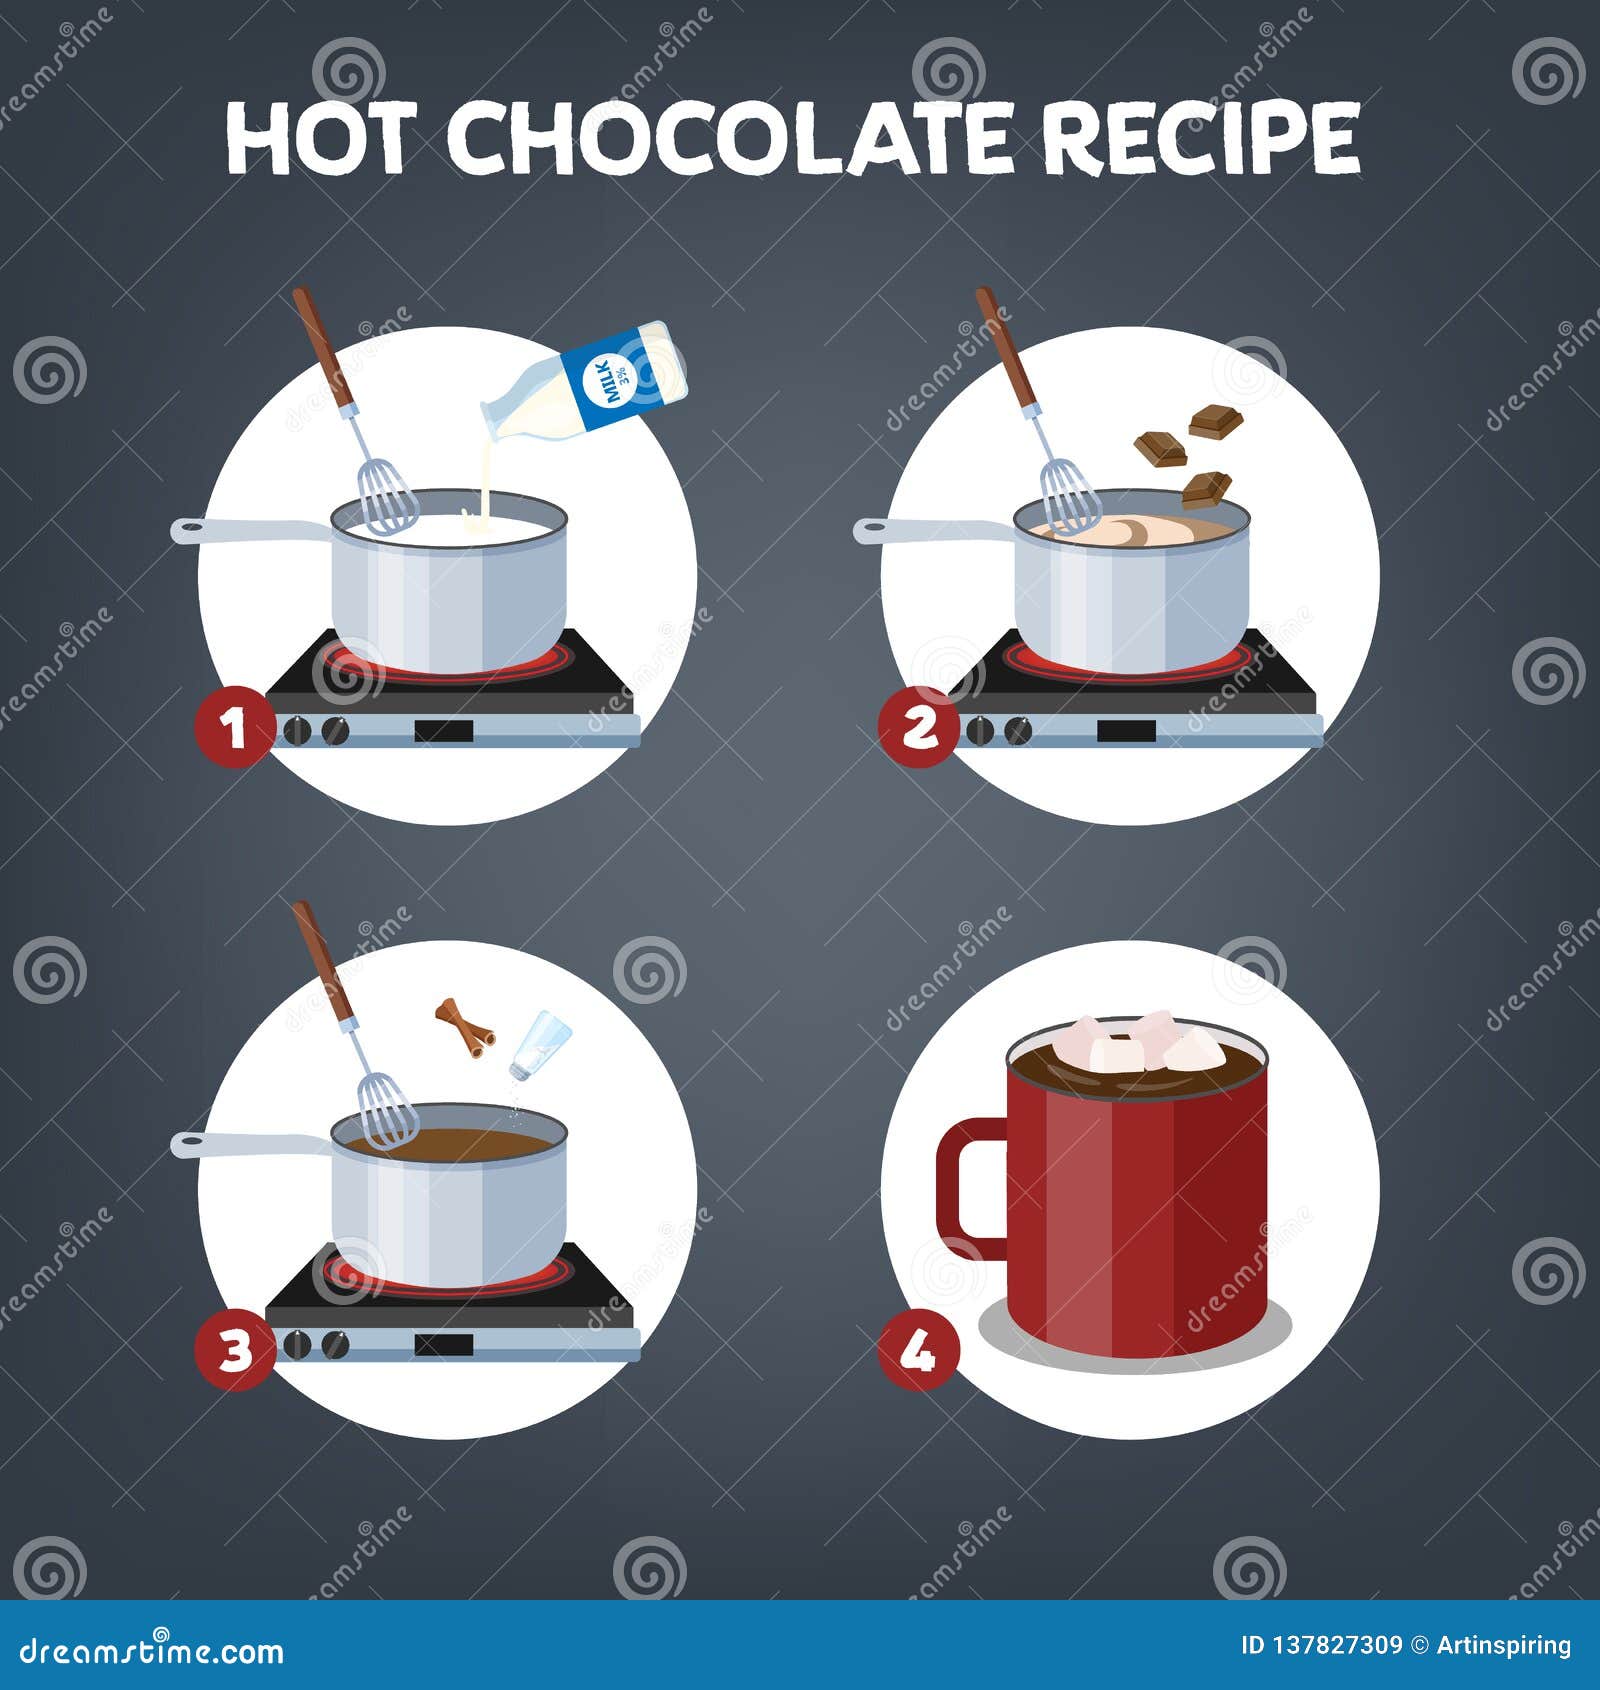 How To Make Hot Chocolate Or Cocoa Guide. Stock Vector